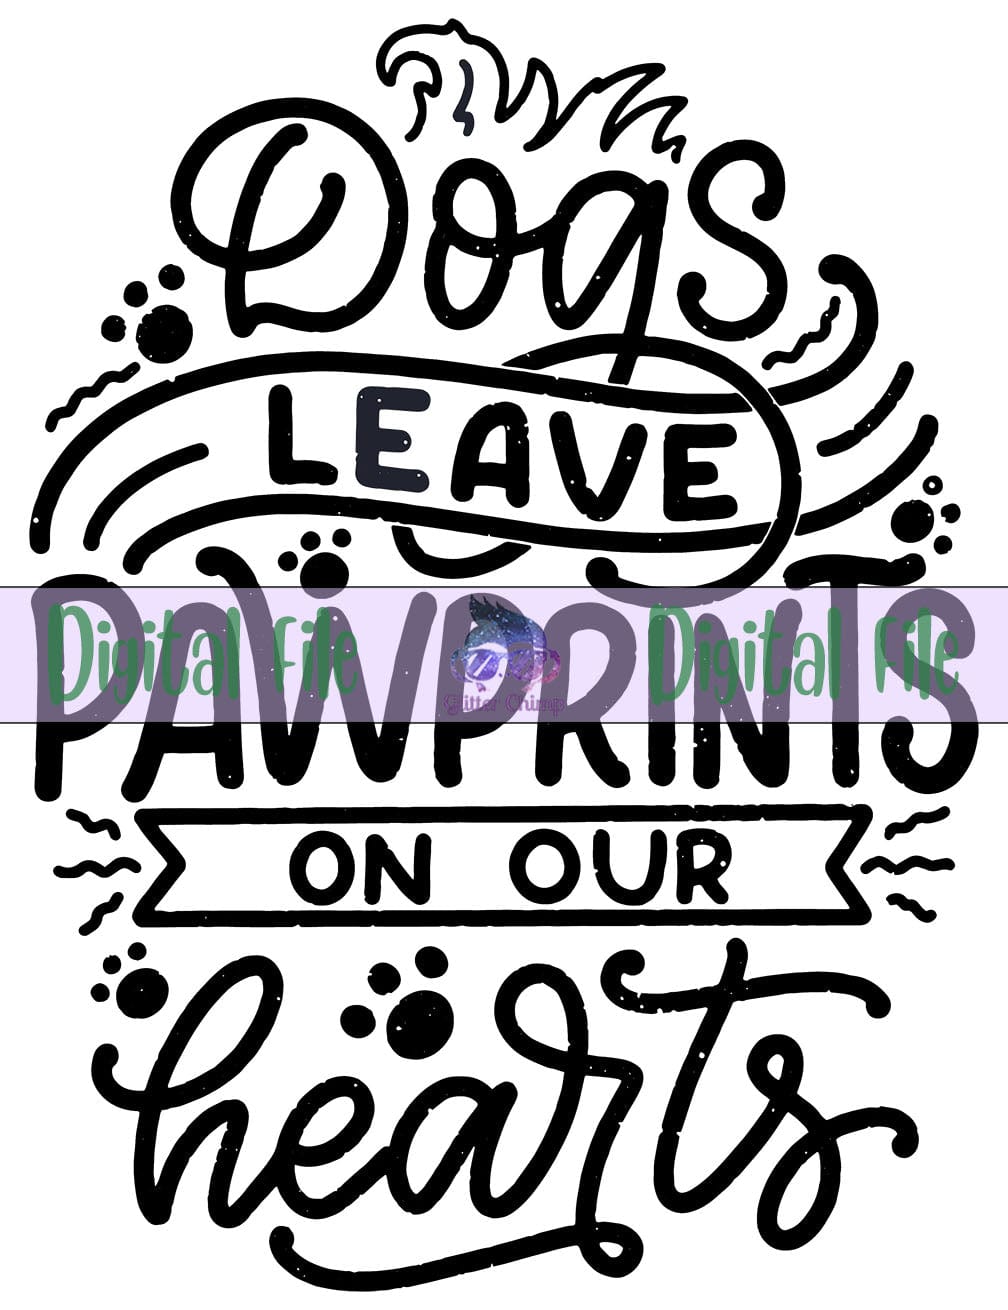 Dogs Leave Paw Prints On Our Hearts - Digital File